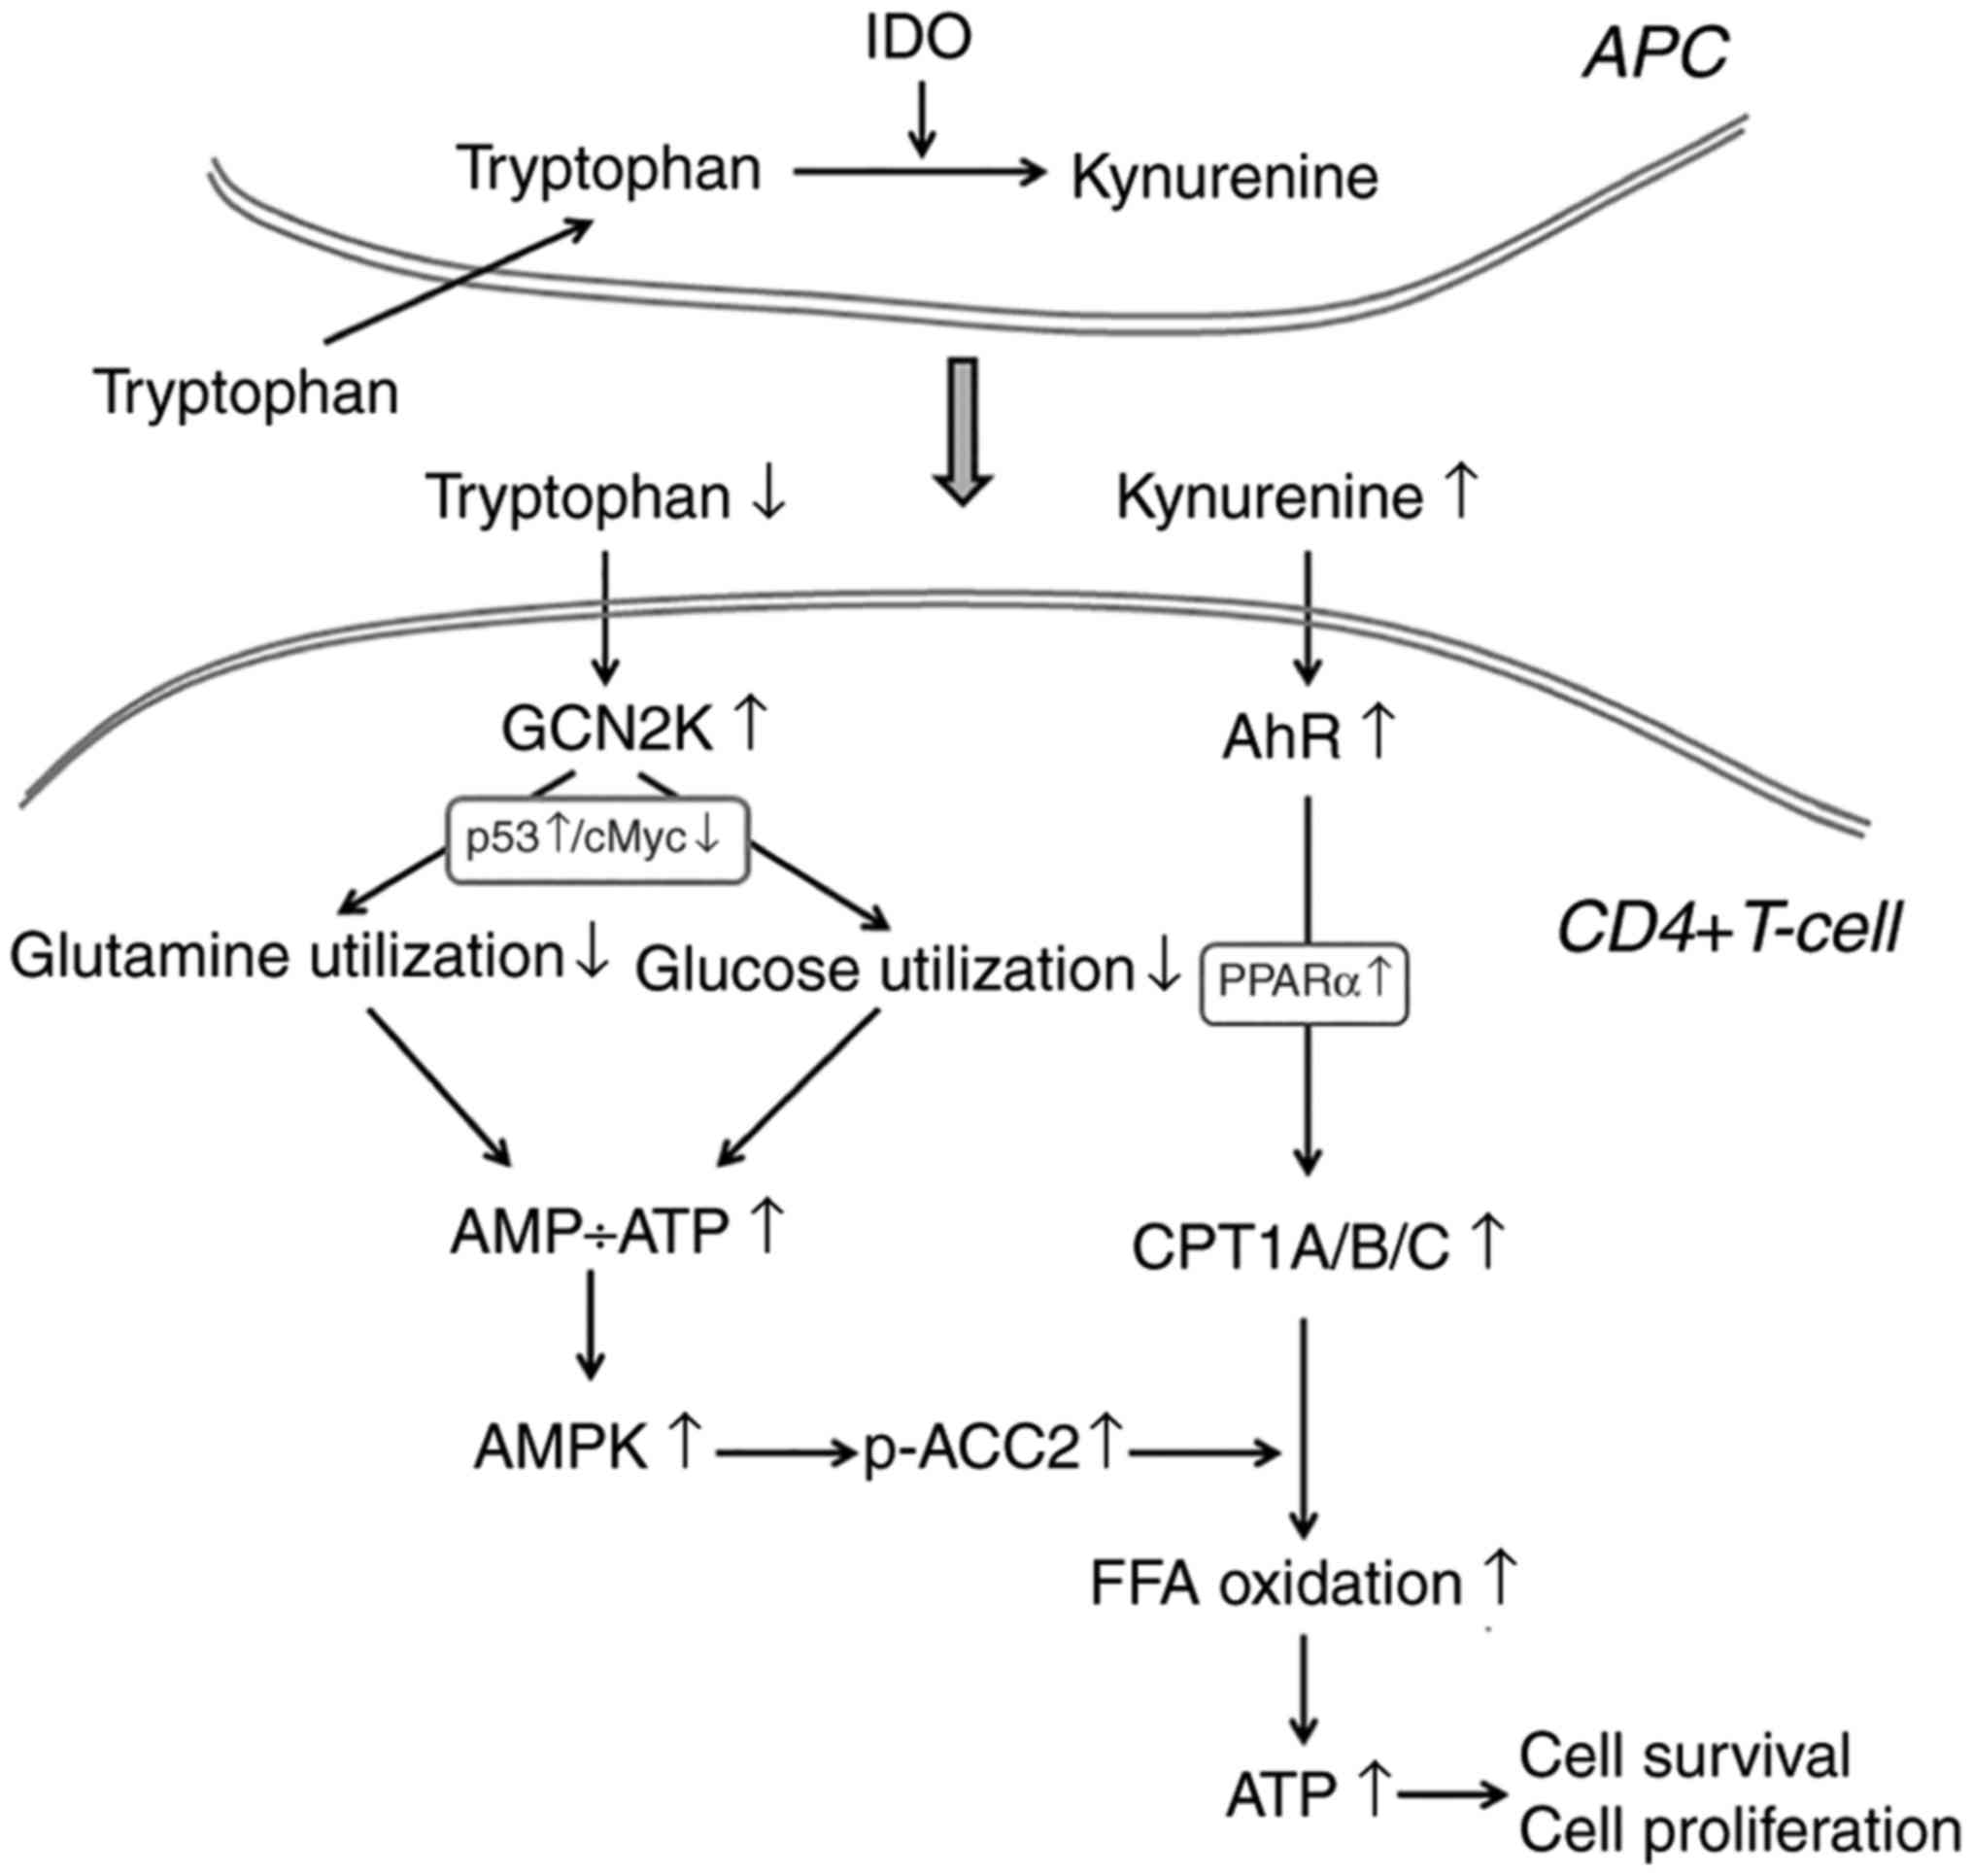 Ido Decreases Glycolysis And Glutaminolysis By Activating Gcn2k While